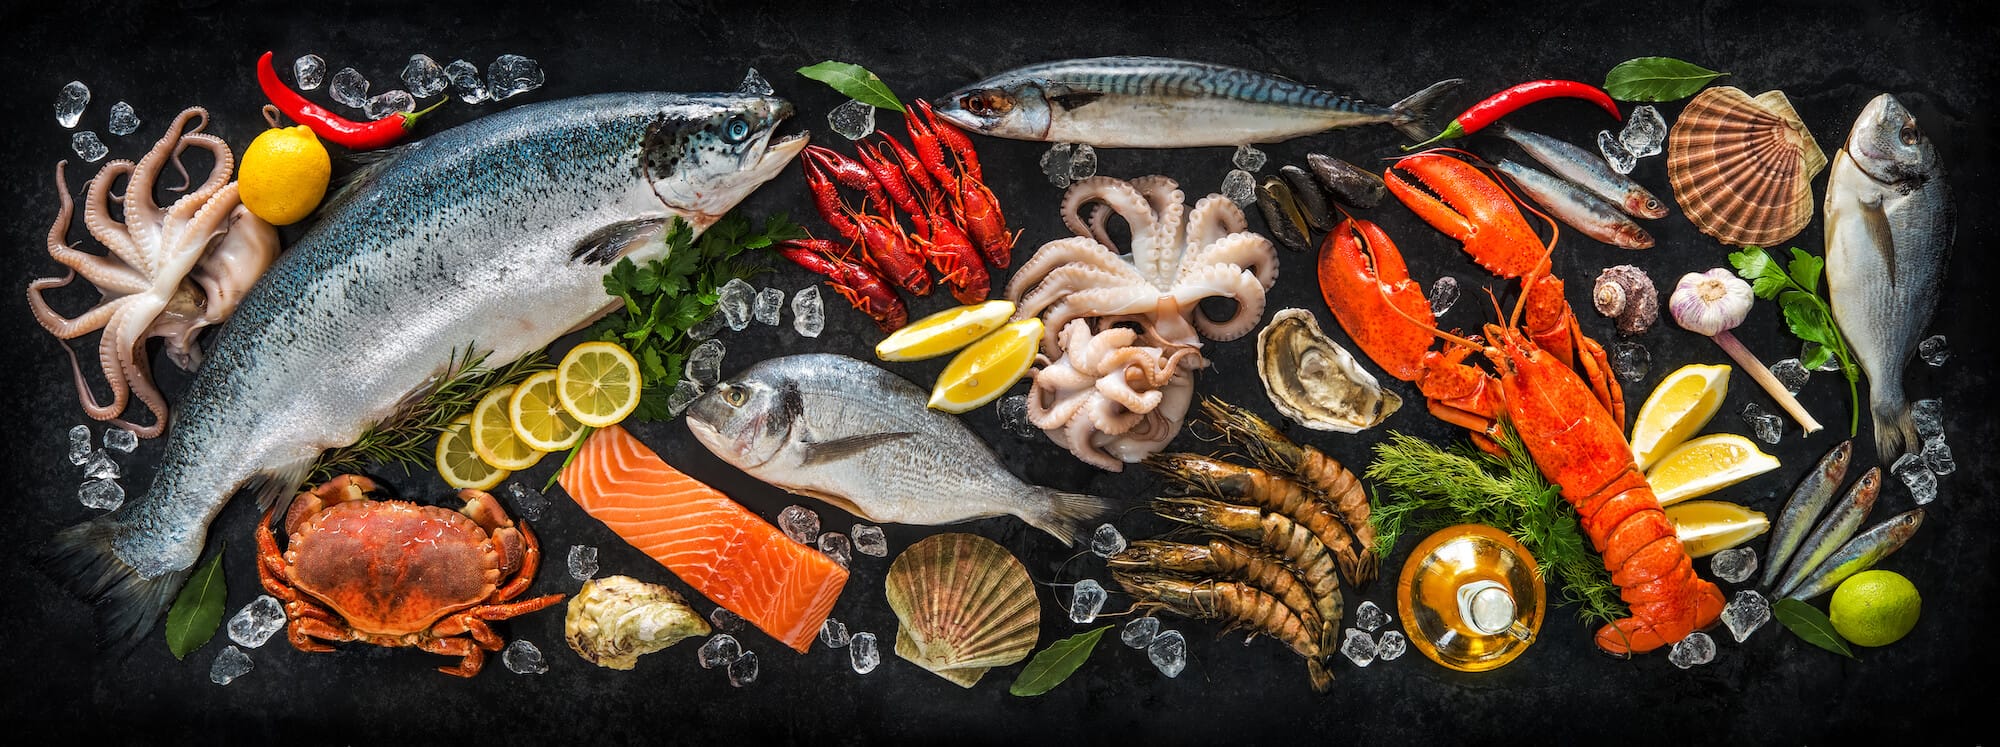 I recommend wild-caught over farmed seafood to avoid any of the toxins often present in commercial feed.